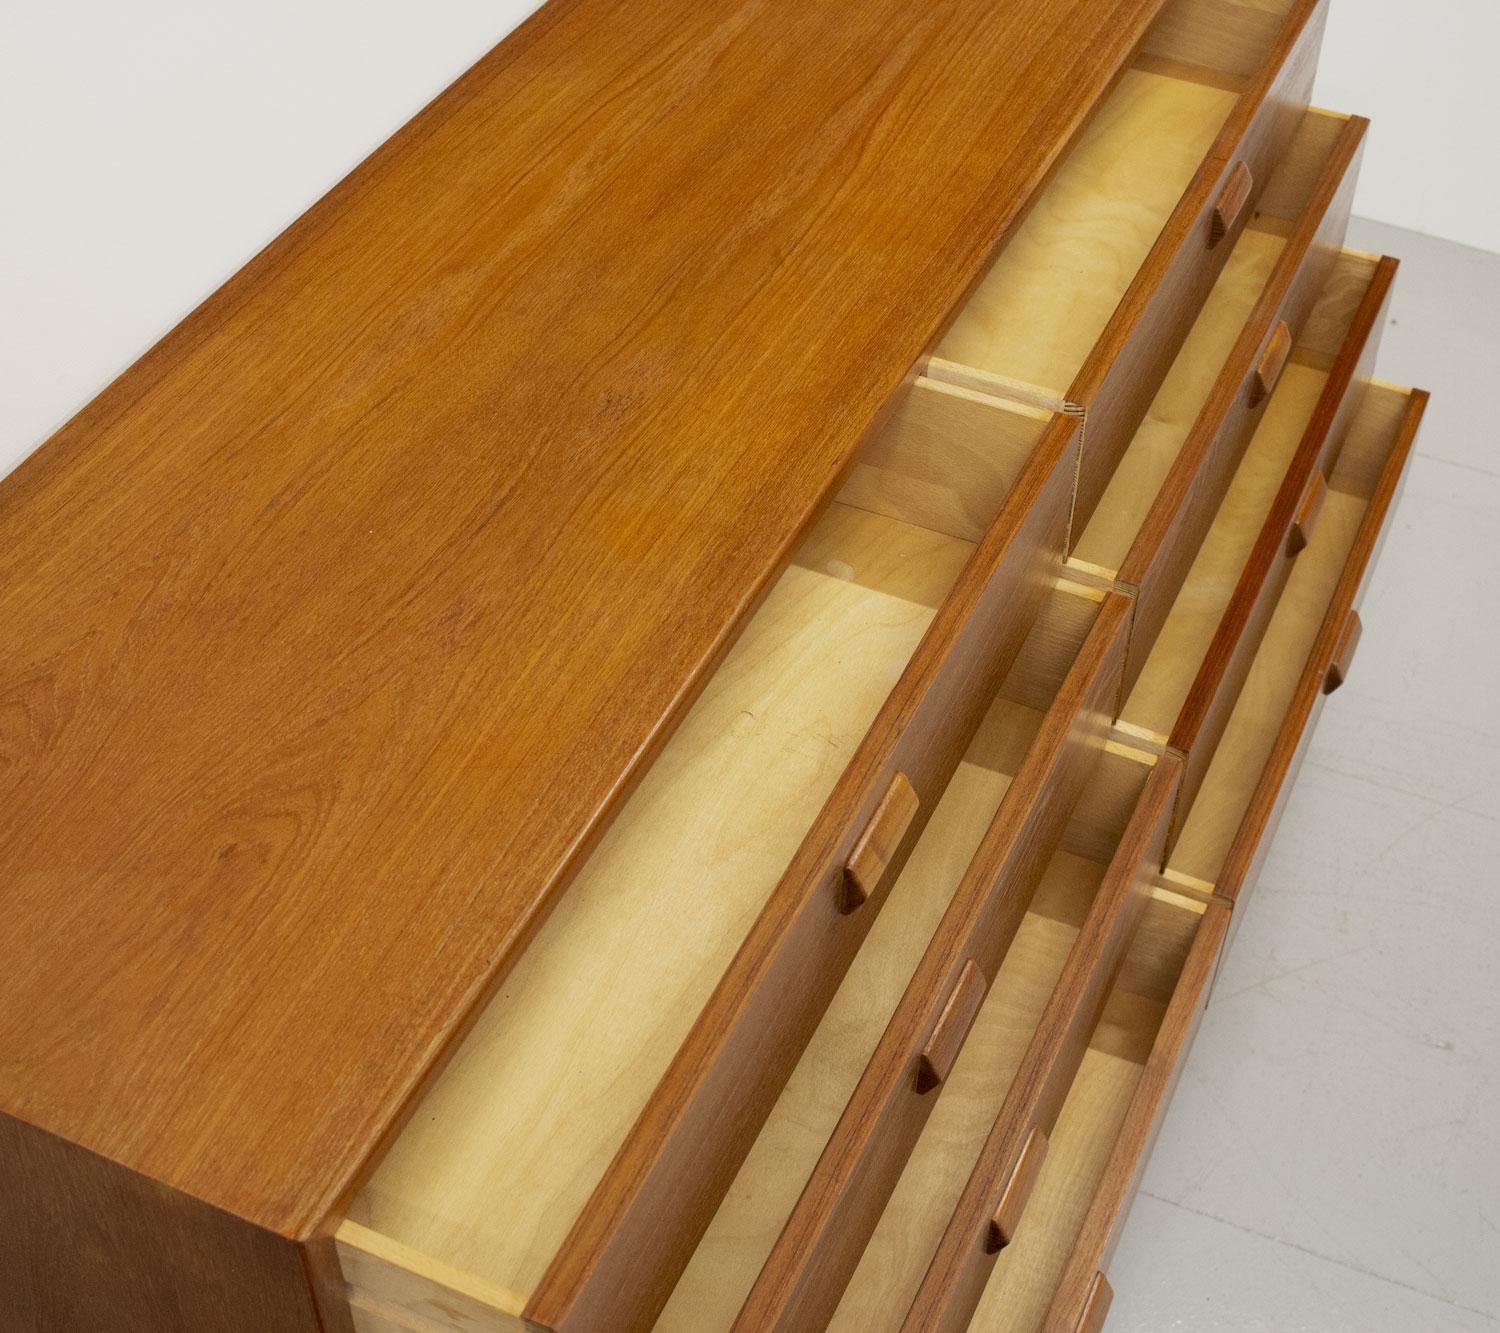 Danish Large Teak Chest of Drawers by Borge Mogensen for Soborg, 1950s For Sale 2